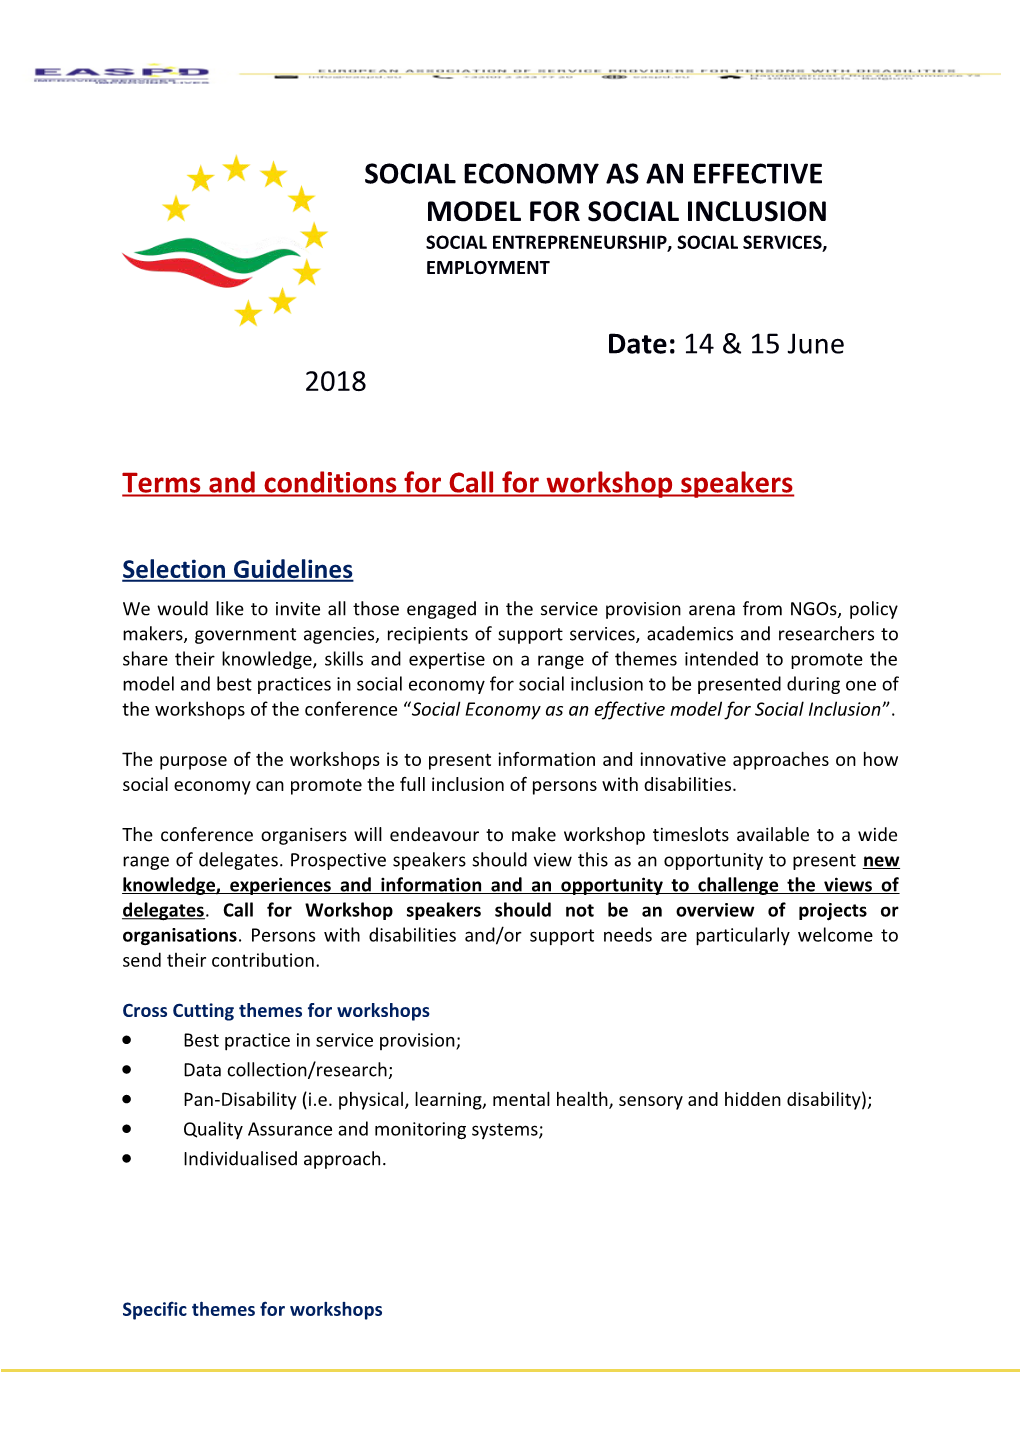 Terms and Conditions for Call for Workshop Speakers